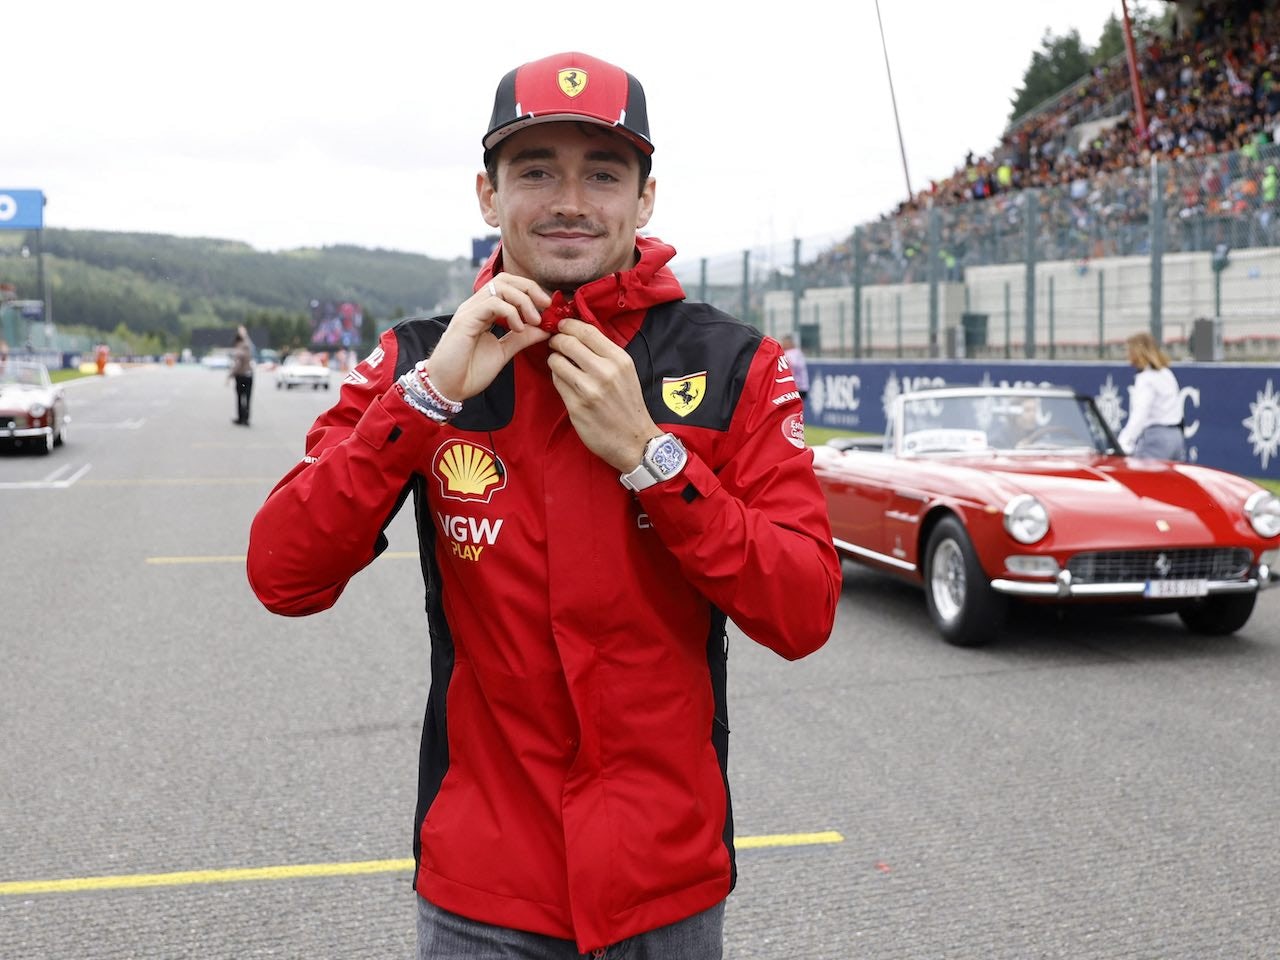 Rumours - Leclerc signs with Ferrari, Sainz with Audi